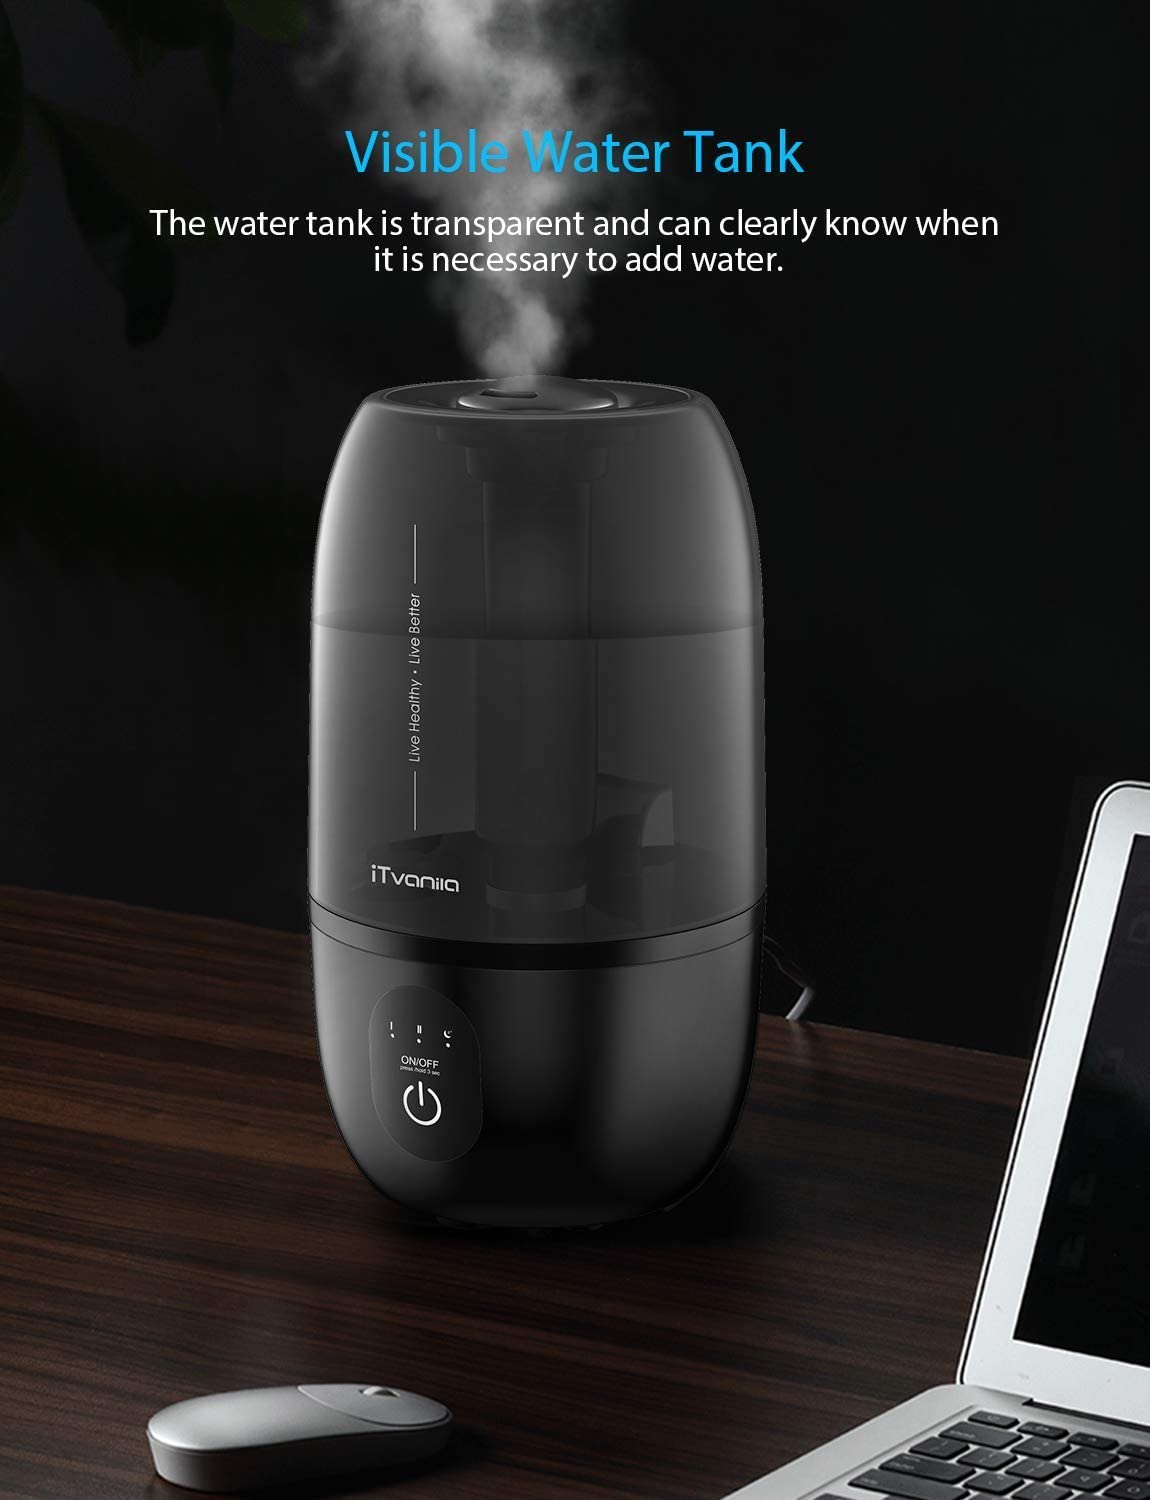 iTvanila -Cool Mist Humidifier 2.7L/0.7Gal Quiet Touch Operation - 360° Rotating Nozzle HU-C1 Black, large water tank, compact  easy storage